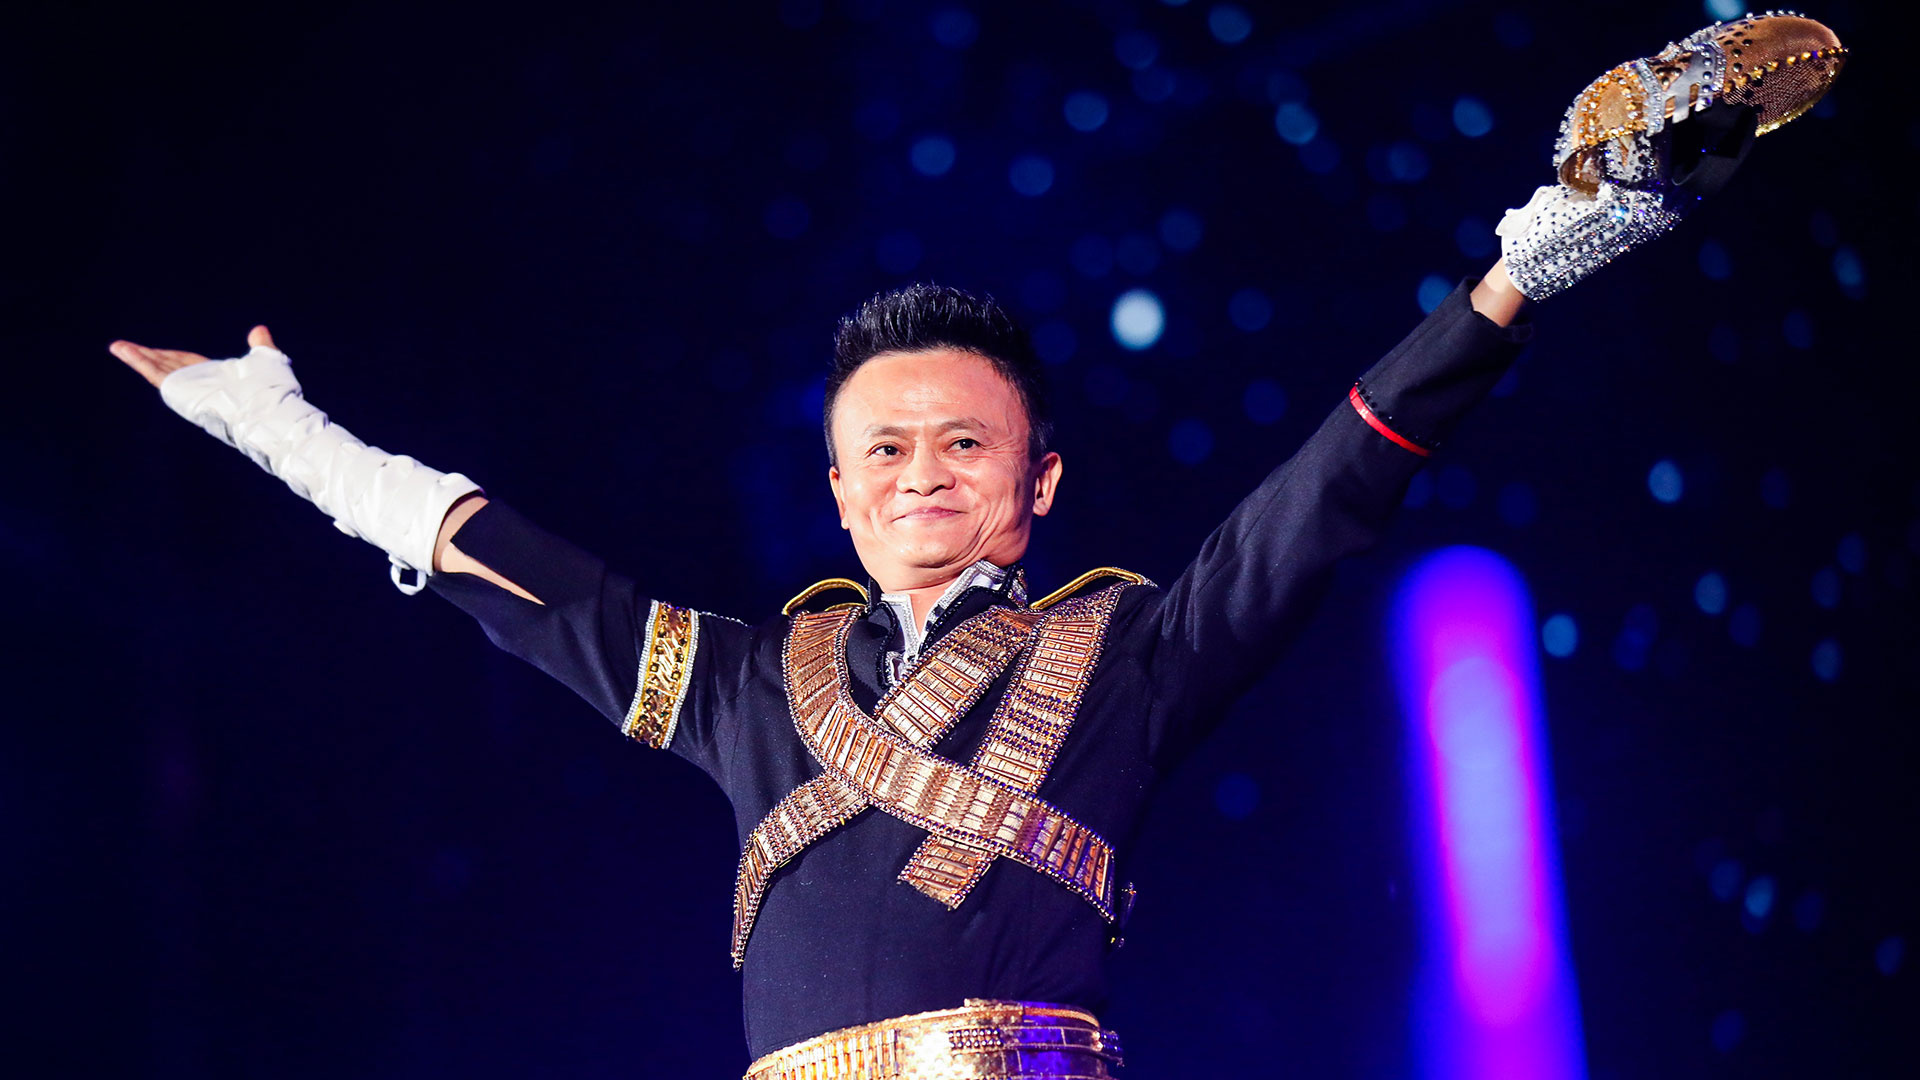 Alibaba Group: Jack Ma, Launched Alipay, a third-party online payment platform, In 2004. 1920x1080 Full HD Background.